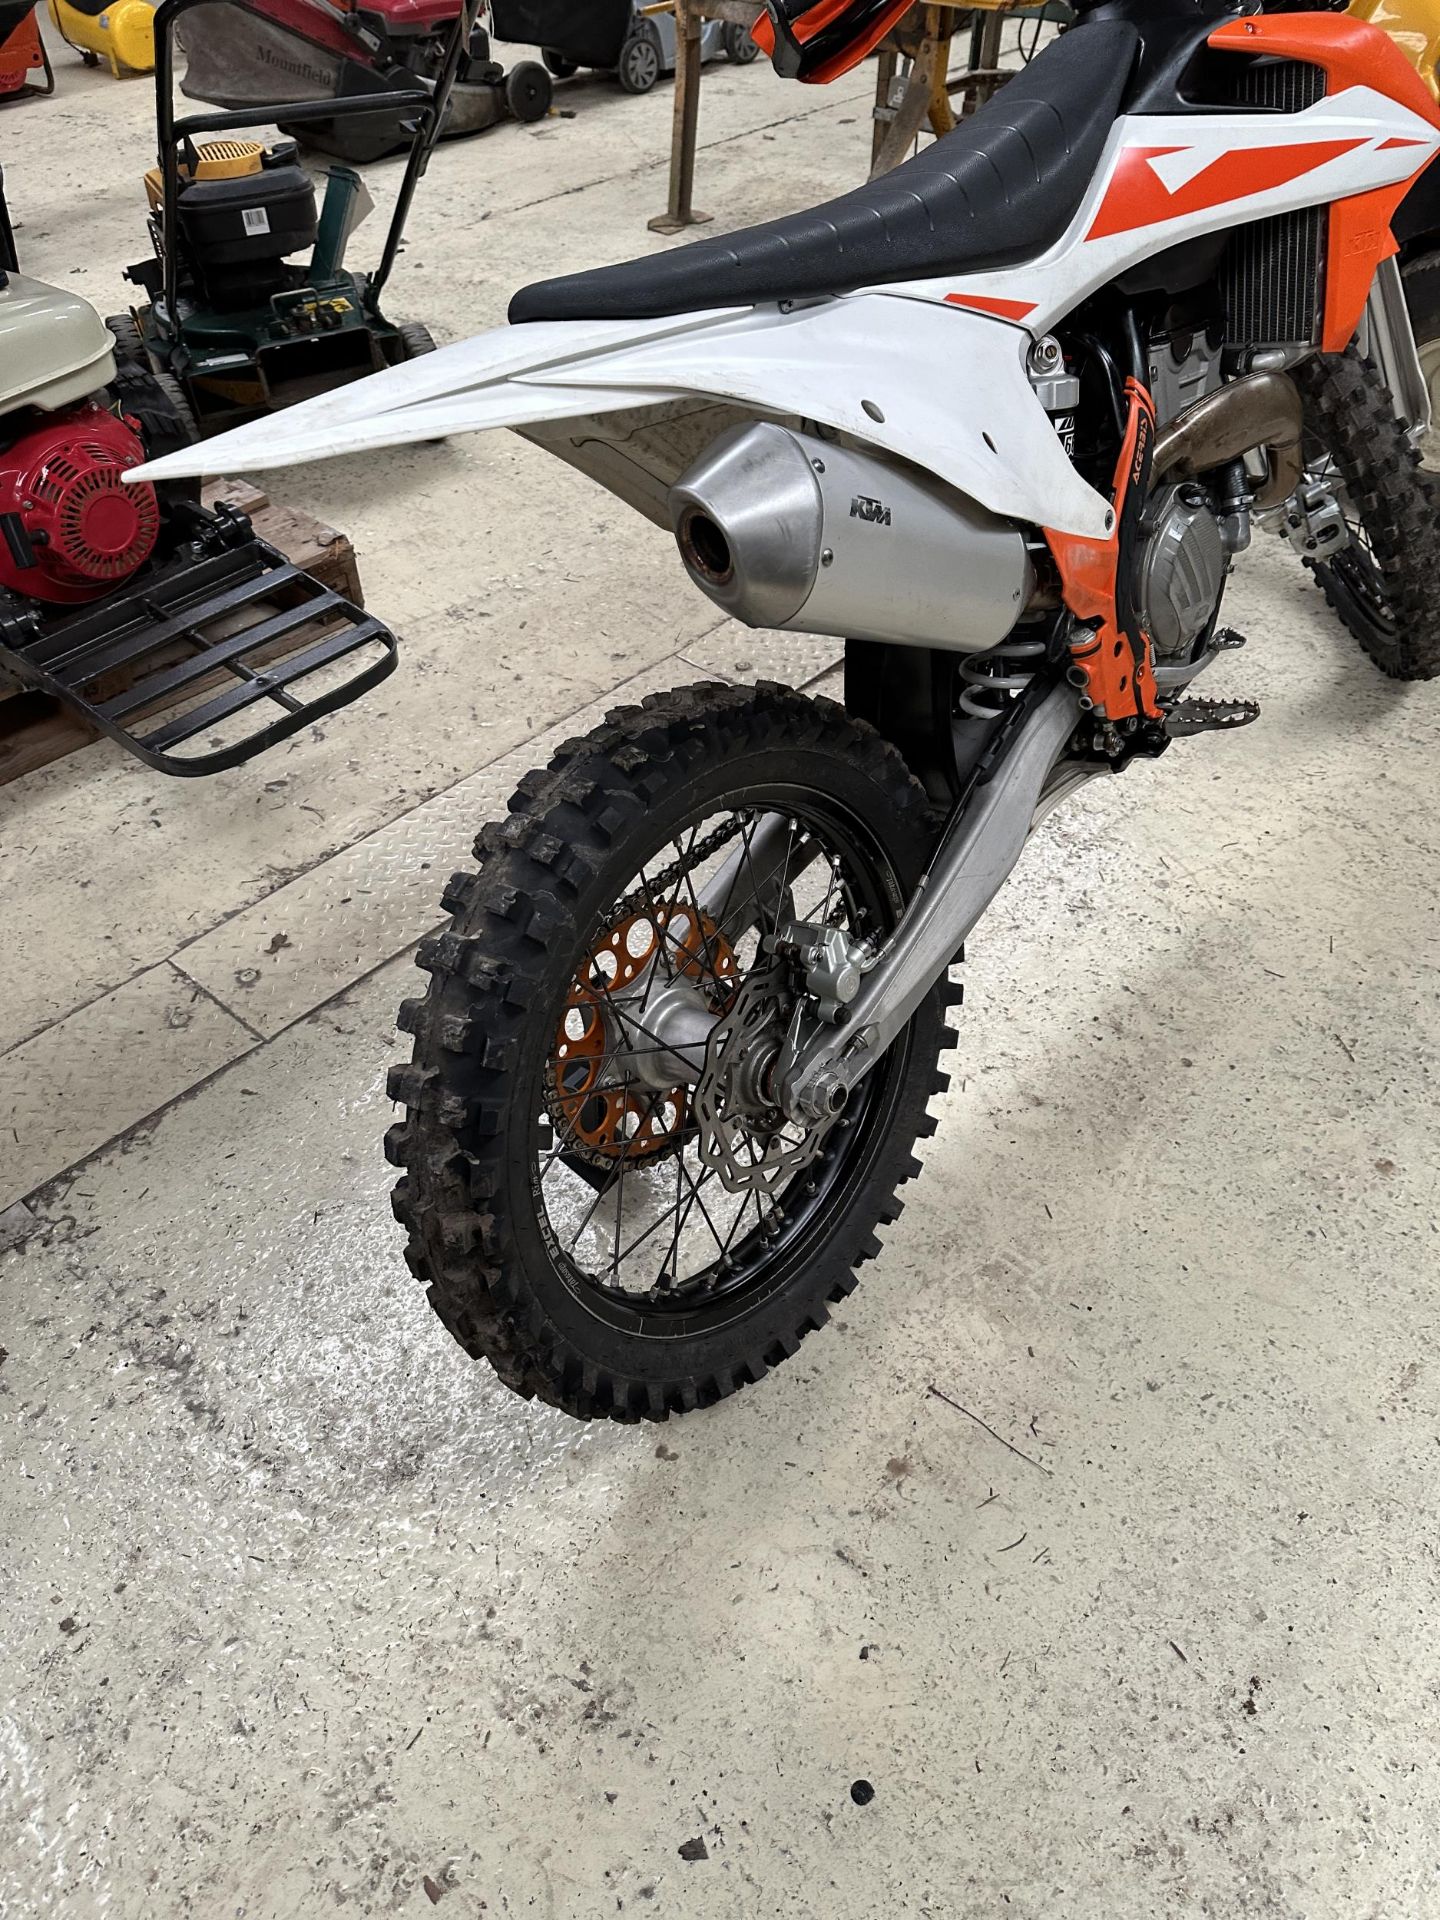 2019 KTM 250 SXF MOTORBIKE 158 HOURS PISTON & CAM CHAIN DONE 40 HOURS AGO. MAP SWITCH BUTTON, - Image 9 of 9